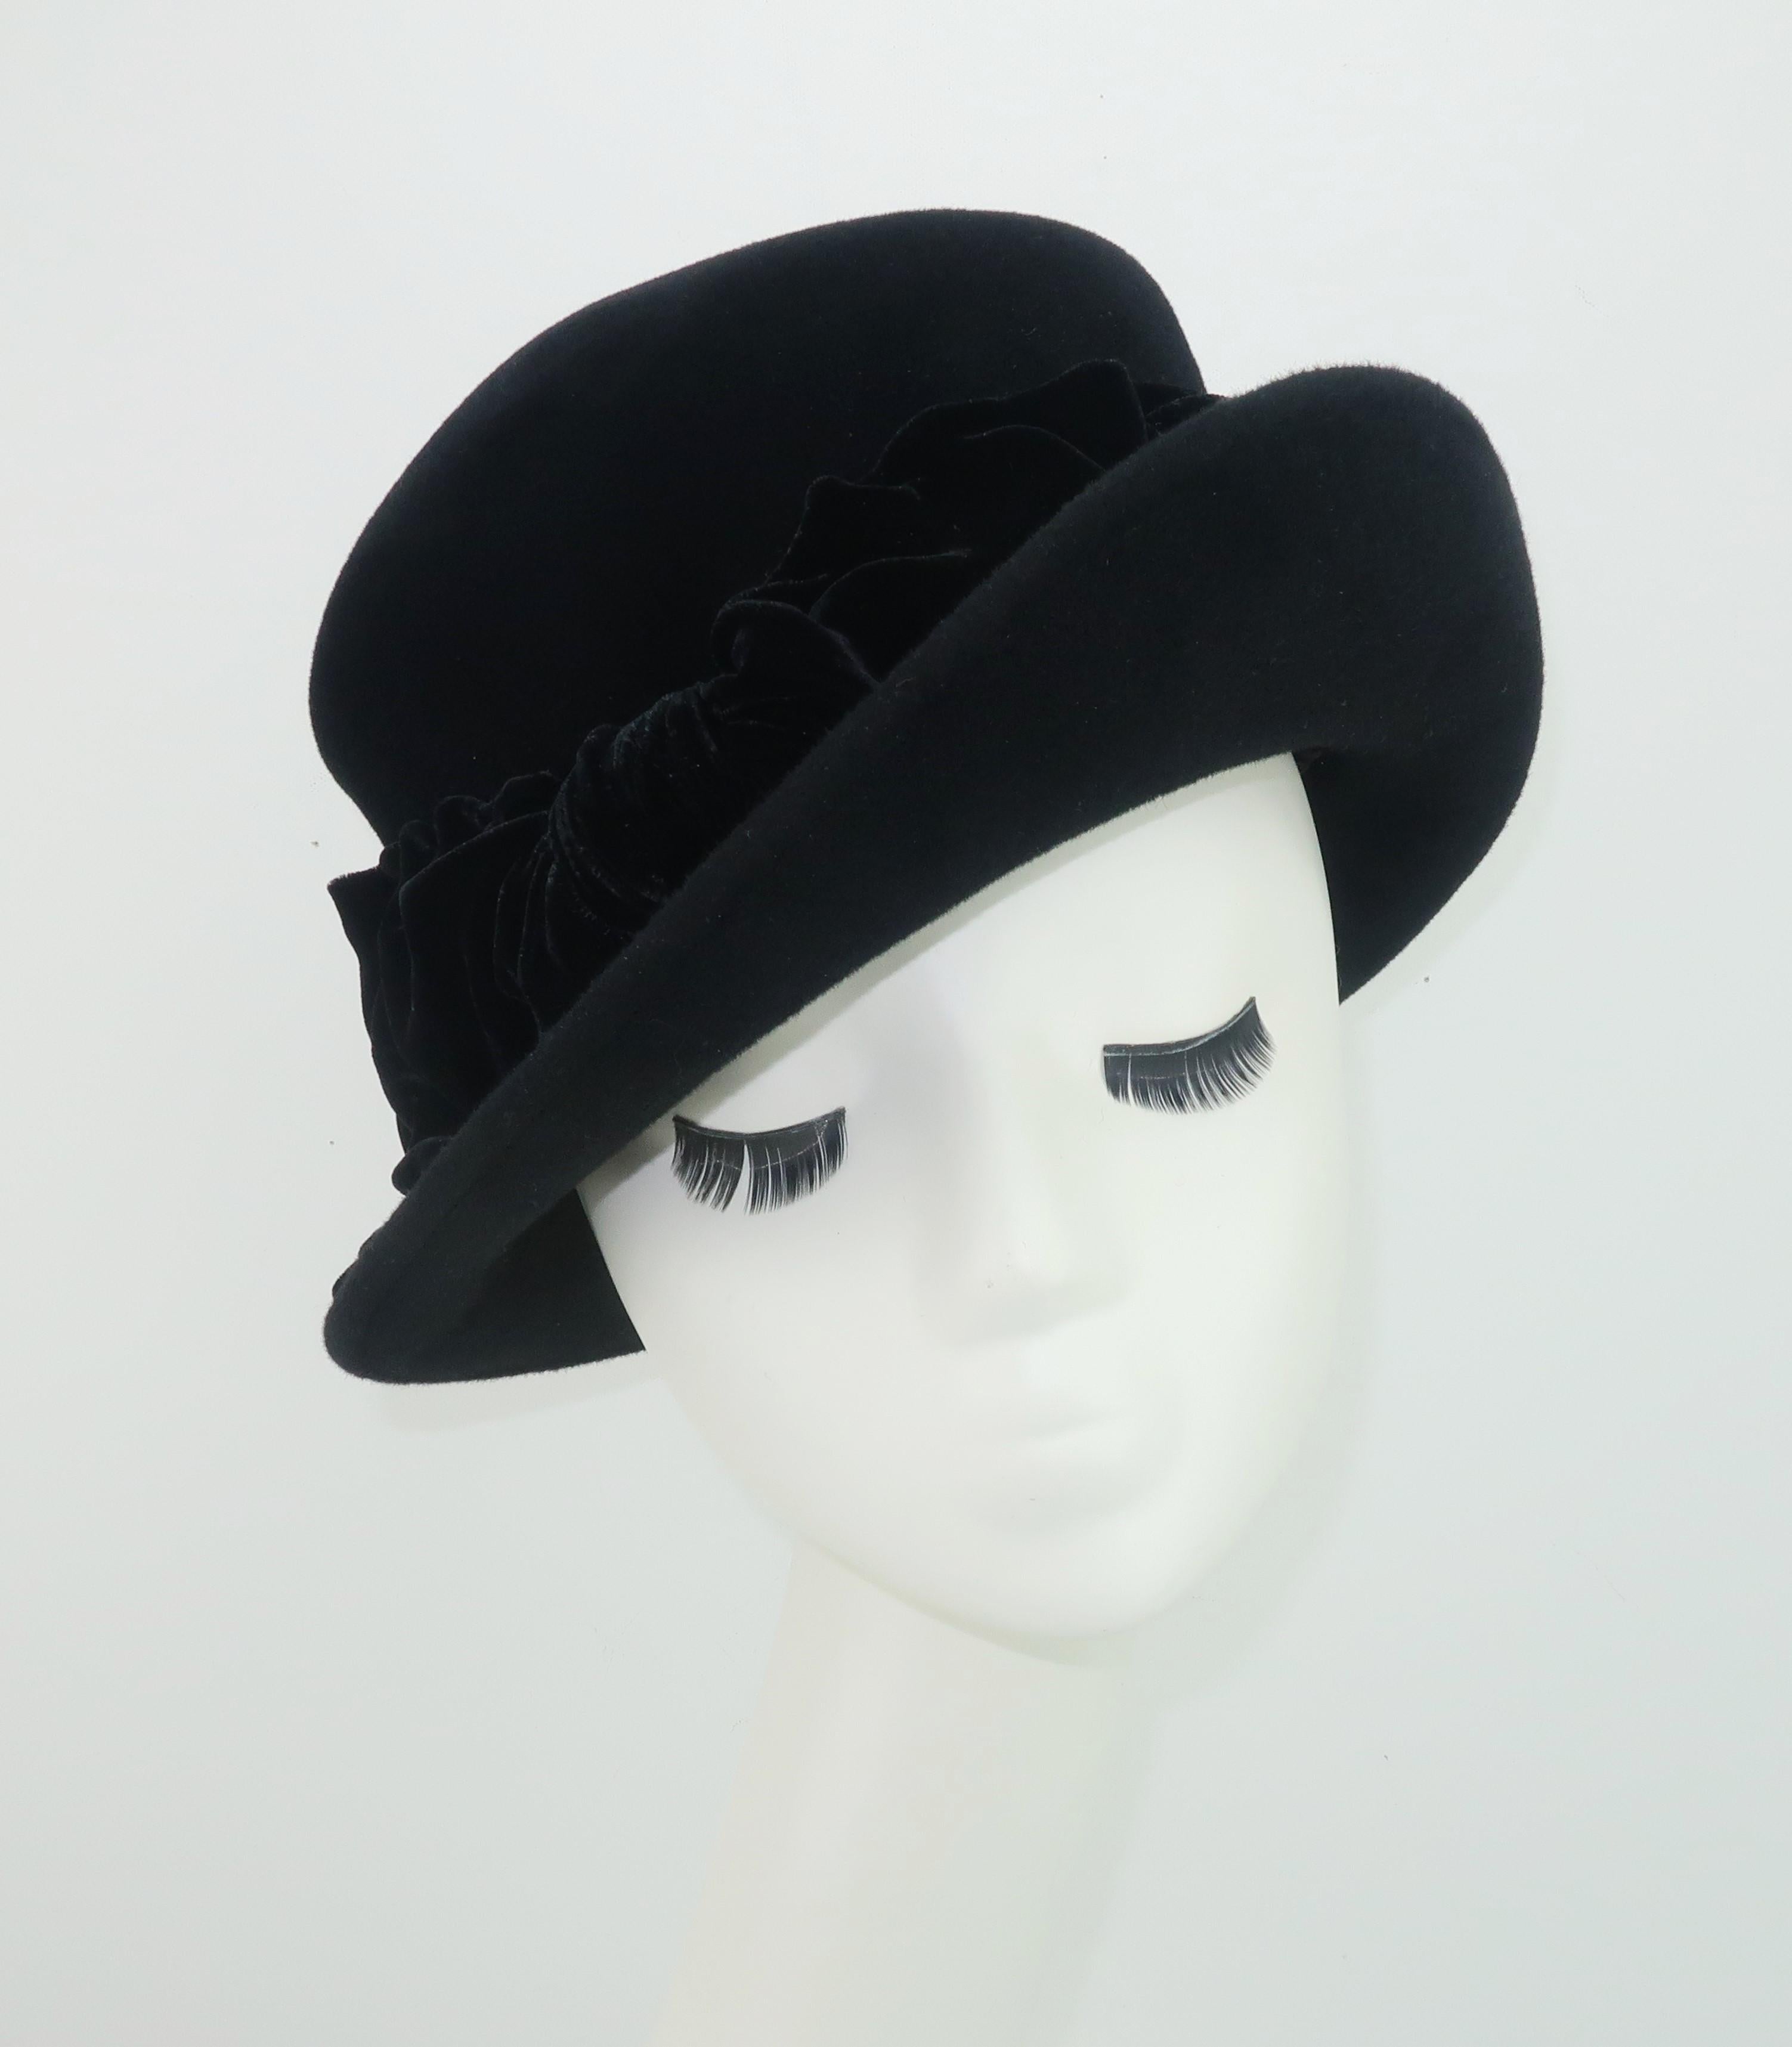 A vintage inspired black wool felt hat with upturned brim and crushed velvet bow by British born and Los Angeles based milliner, Louise Green.  From the beginnings of her millinery business in 1987 until her recent retirement, Ms. Green has been